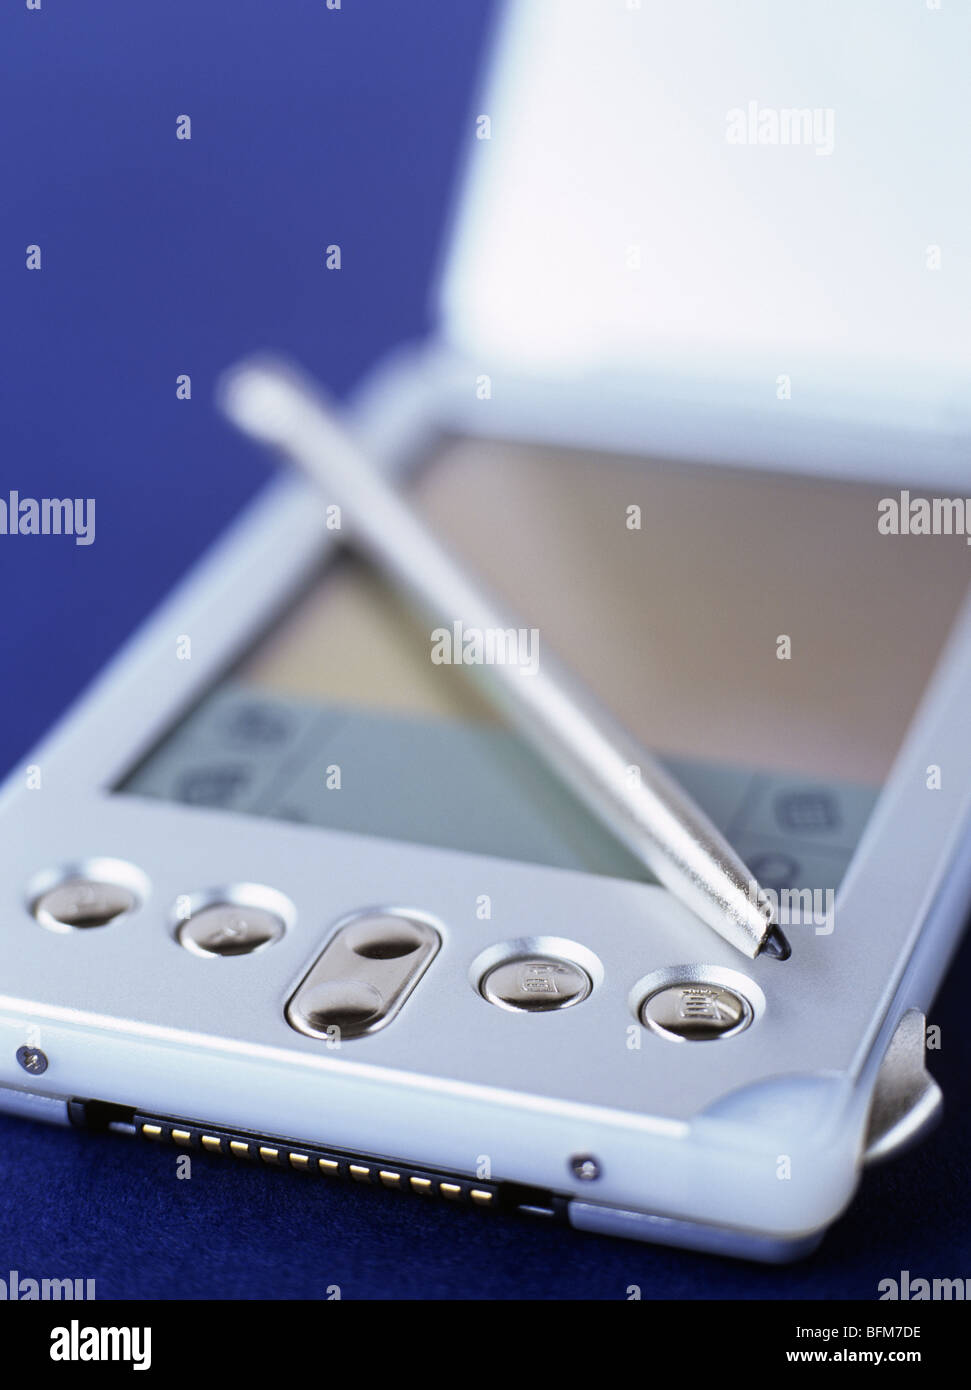 Close-up of a Handspring Visor Edge palmtop computer and stylus in metallic silver on blue Stock Photo